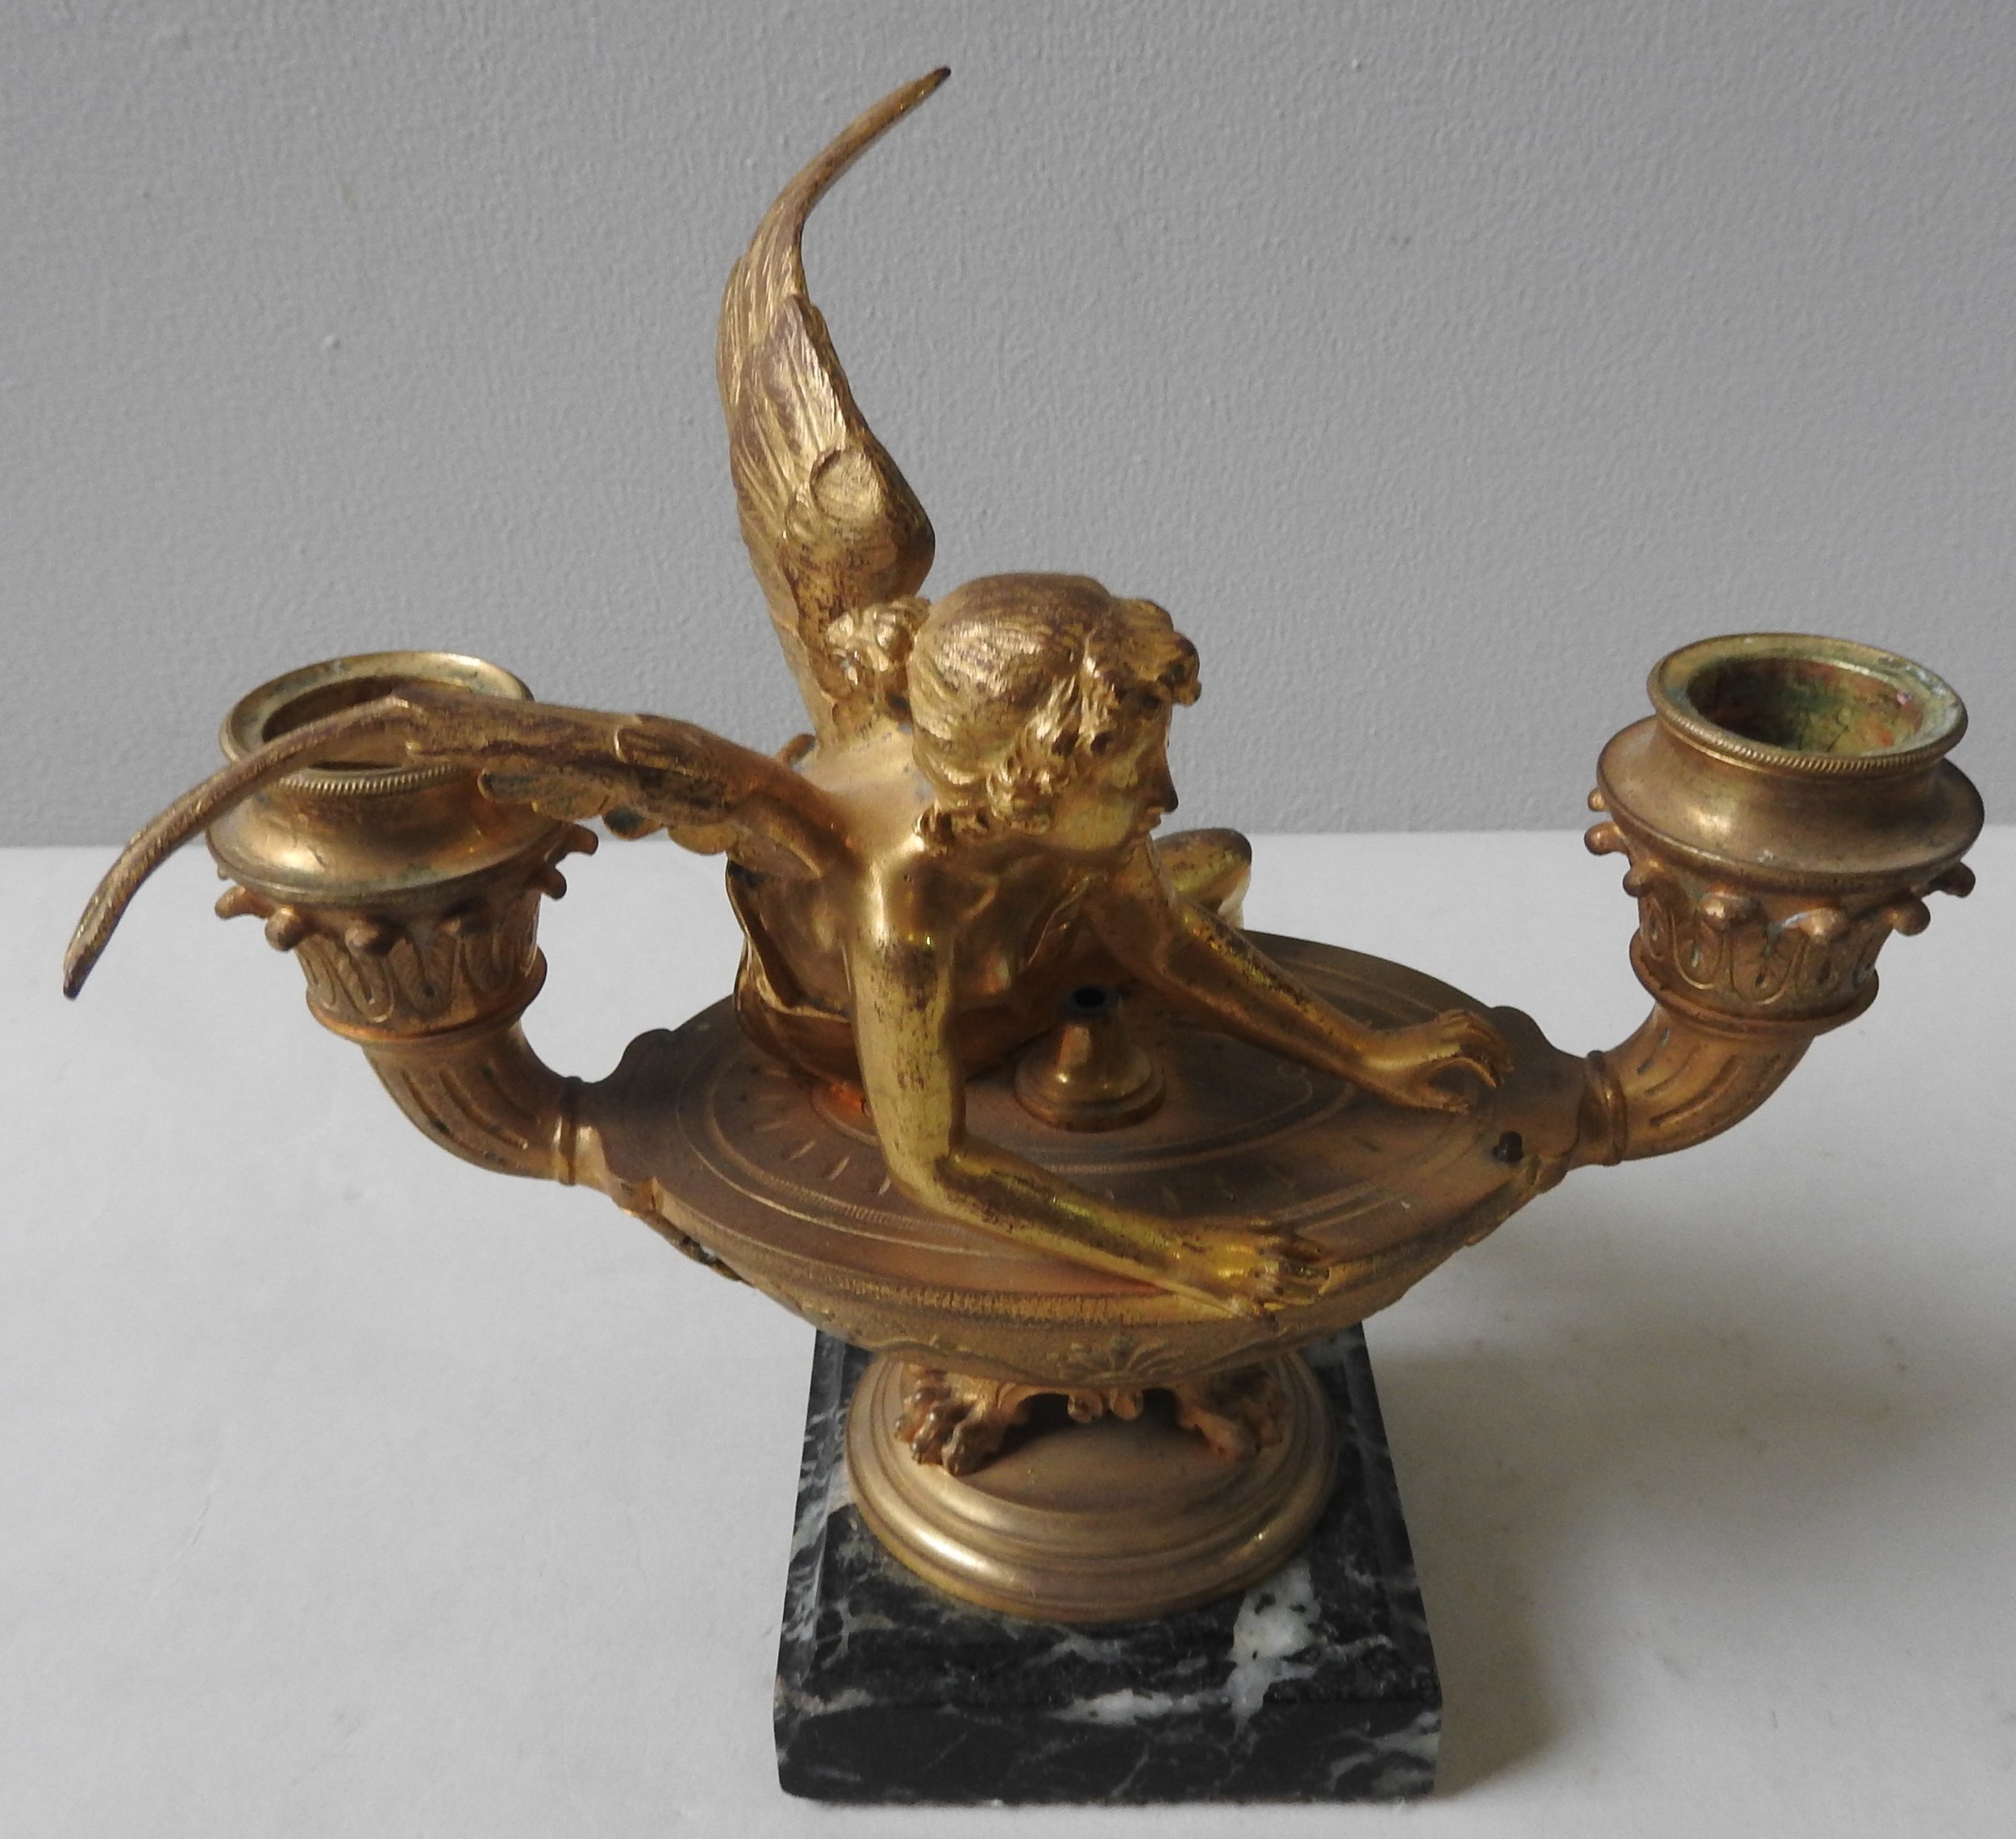 A GILT BRONZE CANDLE HOLDER, 19TH CENTURY, in the form of a classical oval shaped urn flanked by - Image 2 of 3